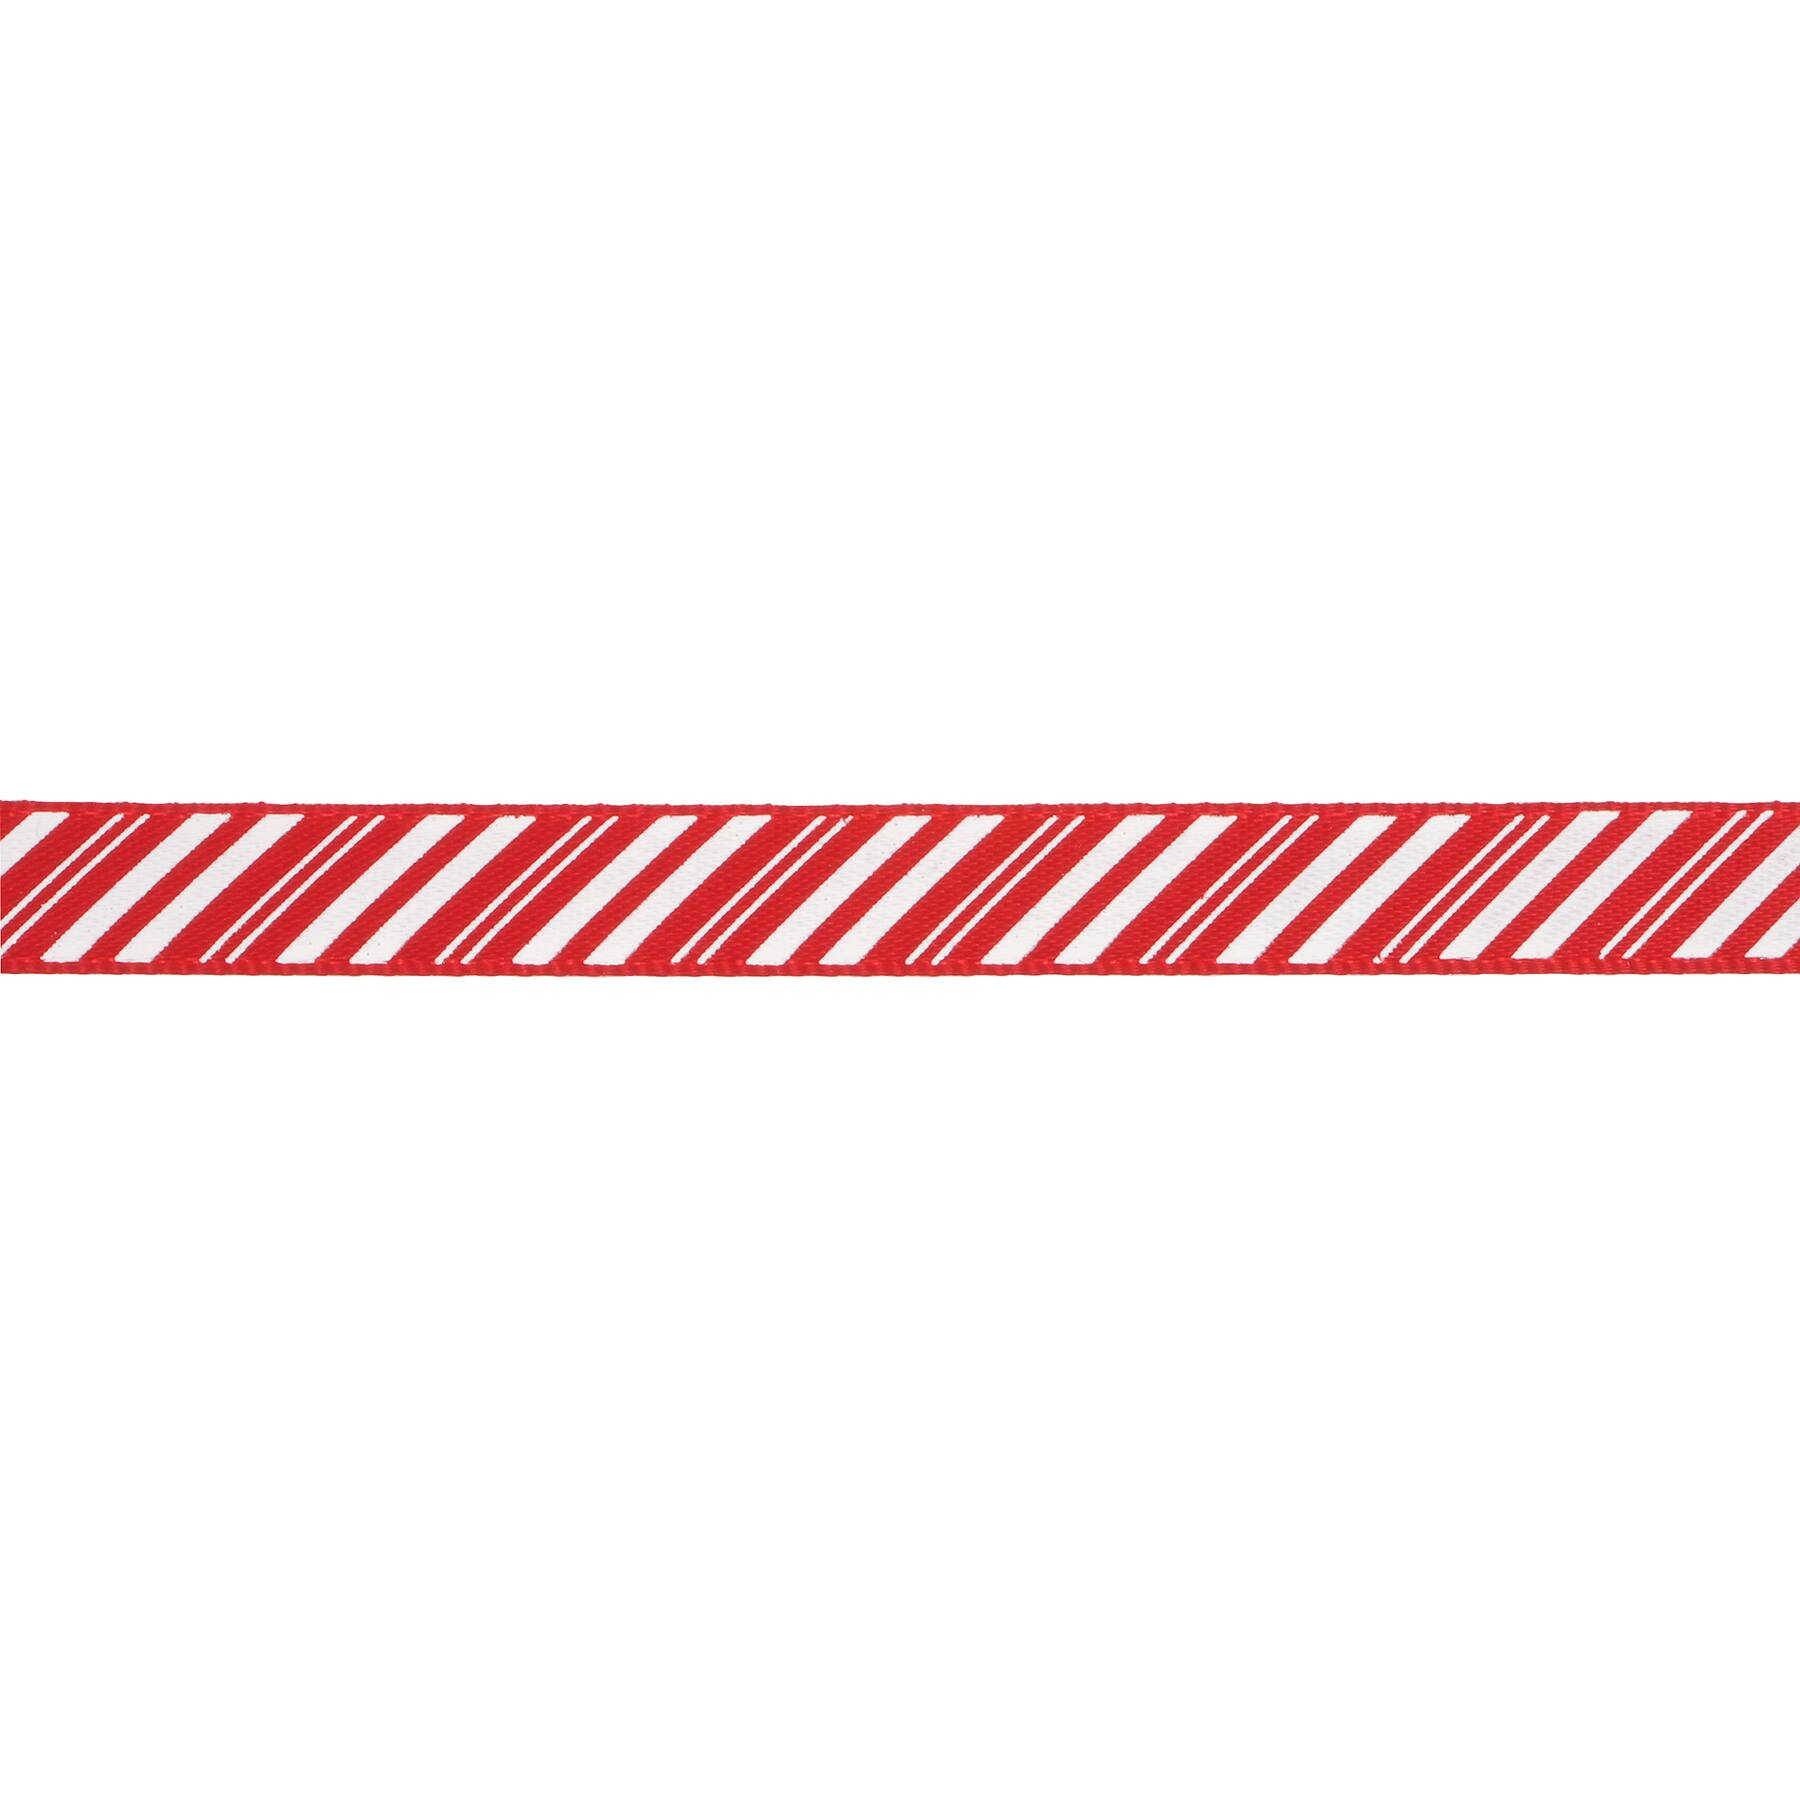 Candy cane stripe ribbon in red and white printed on 7/8 white single face  satin, 10 yards